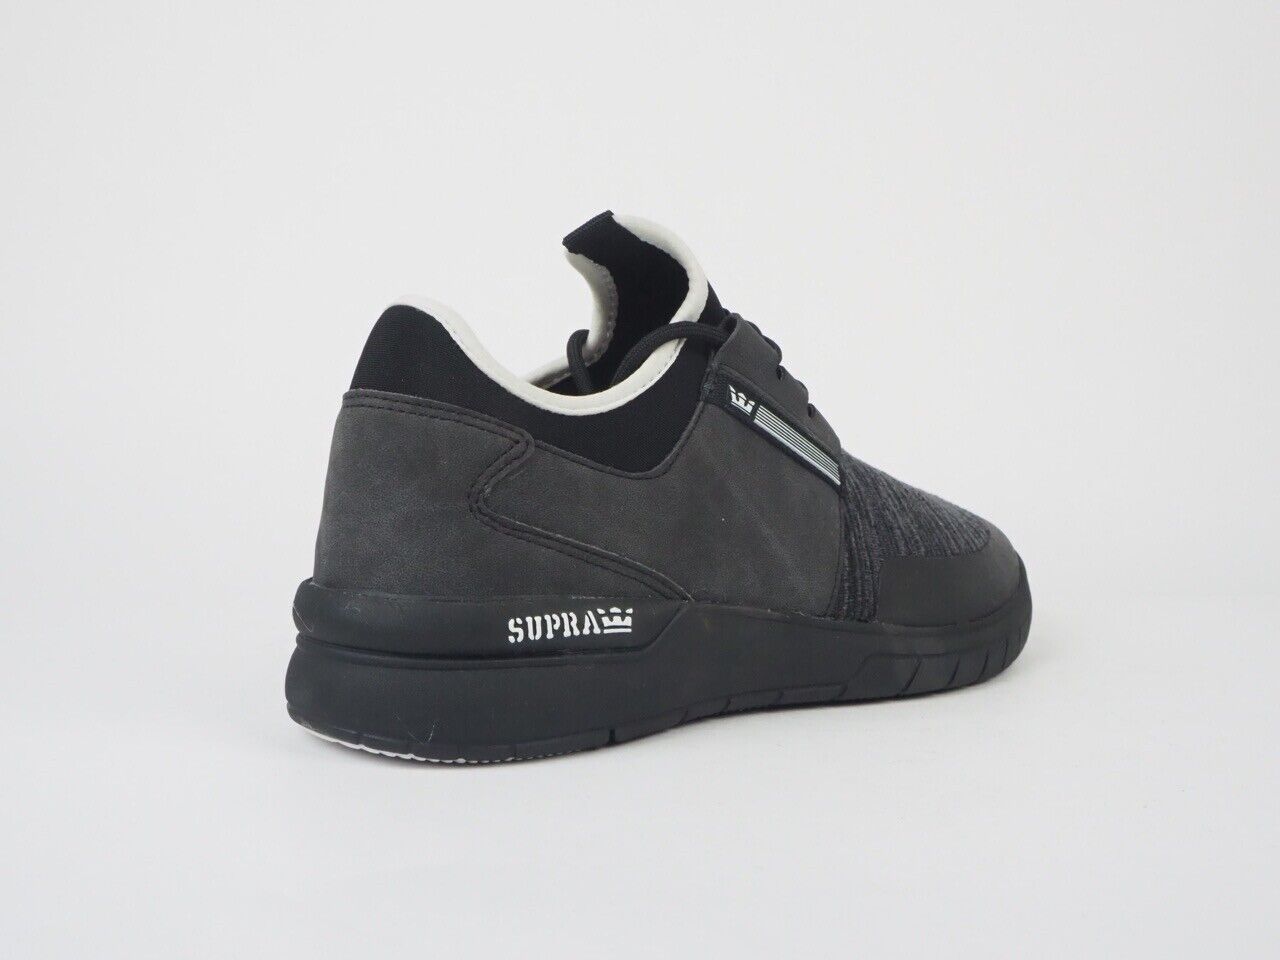 Mens Supra Flow Run 08021 957 Black Textile Lace Up Running Trainers - London Top Style